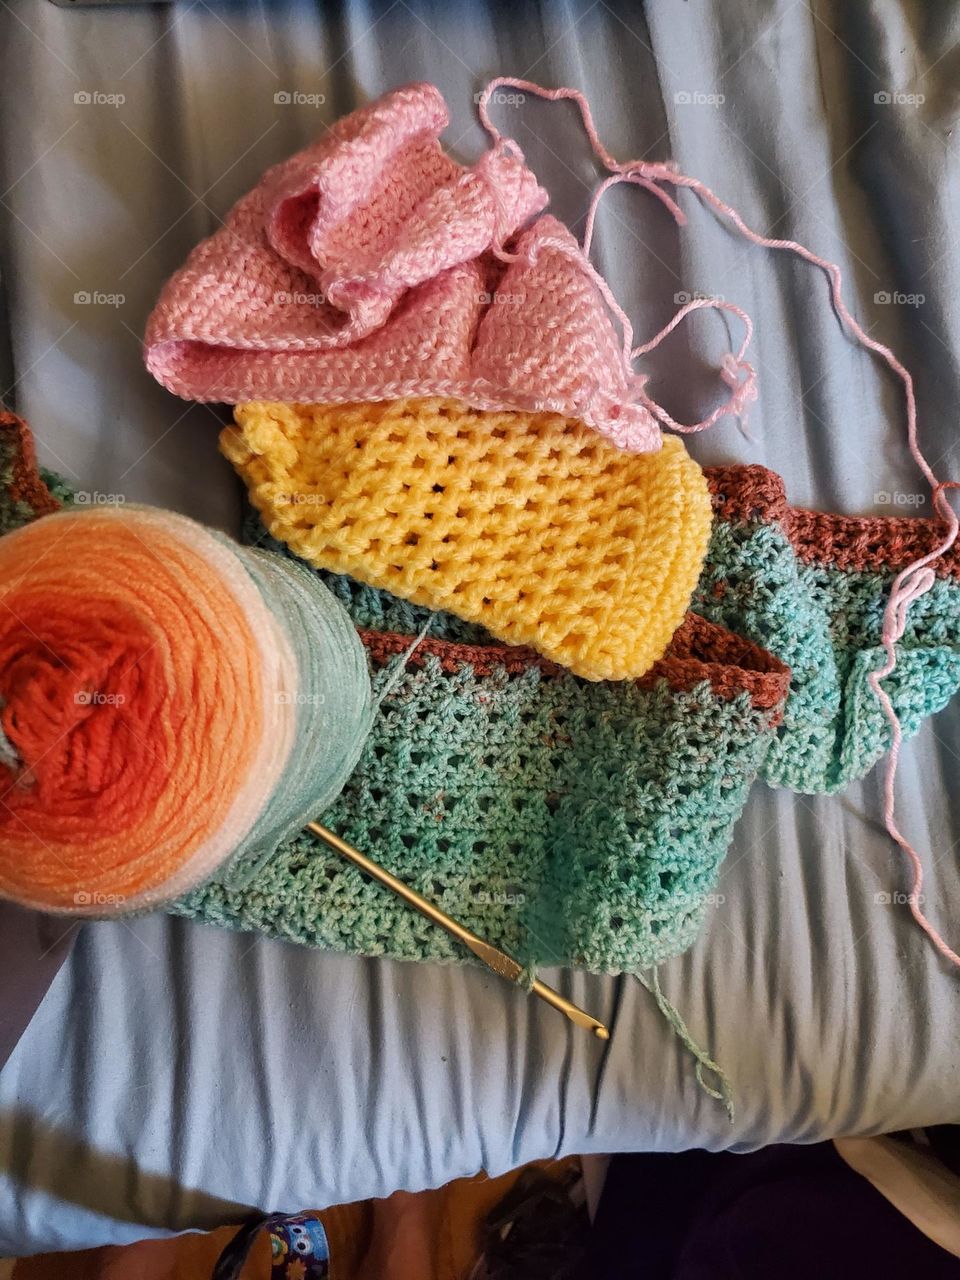 multiple colorful crochet projects that have been started